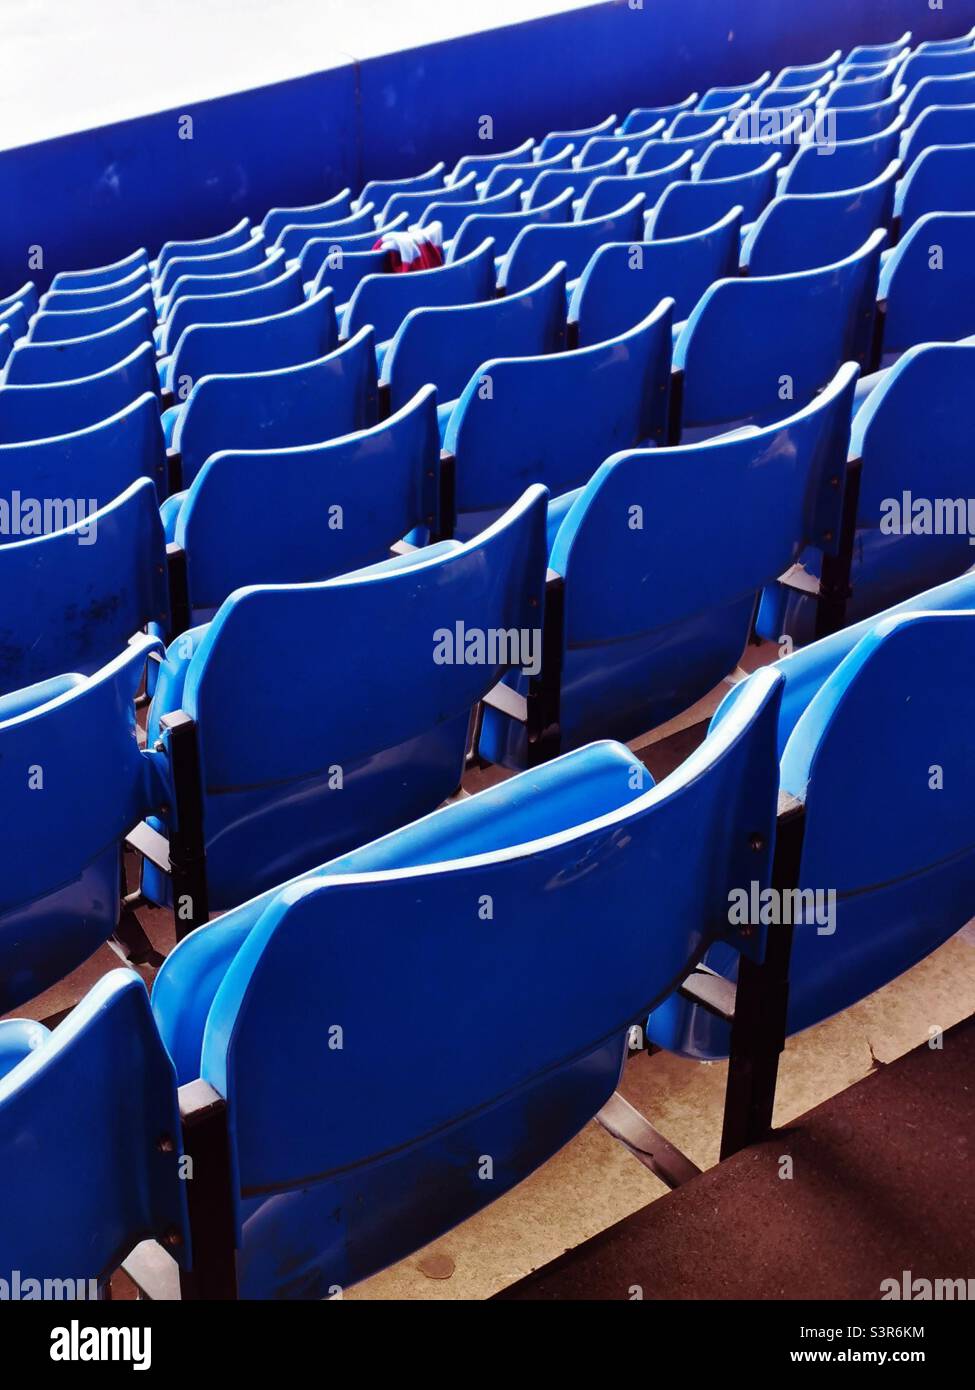 blue rows of chairs on stadium Stock Photo